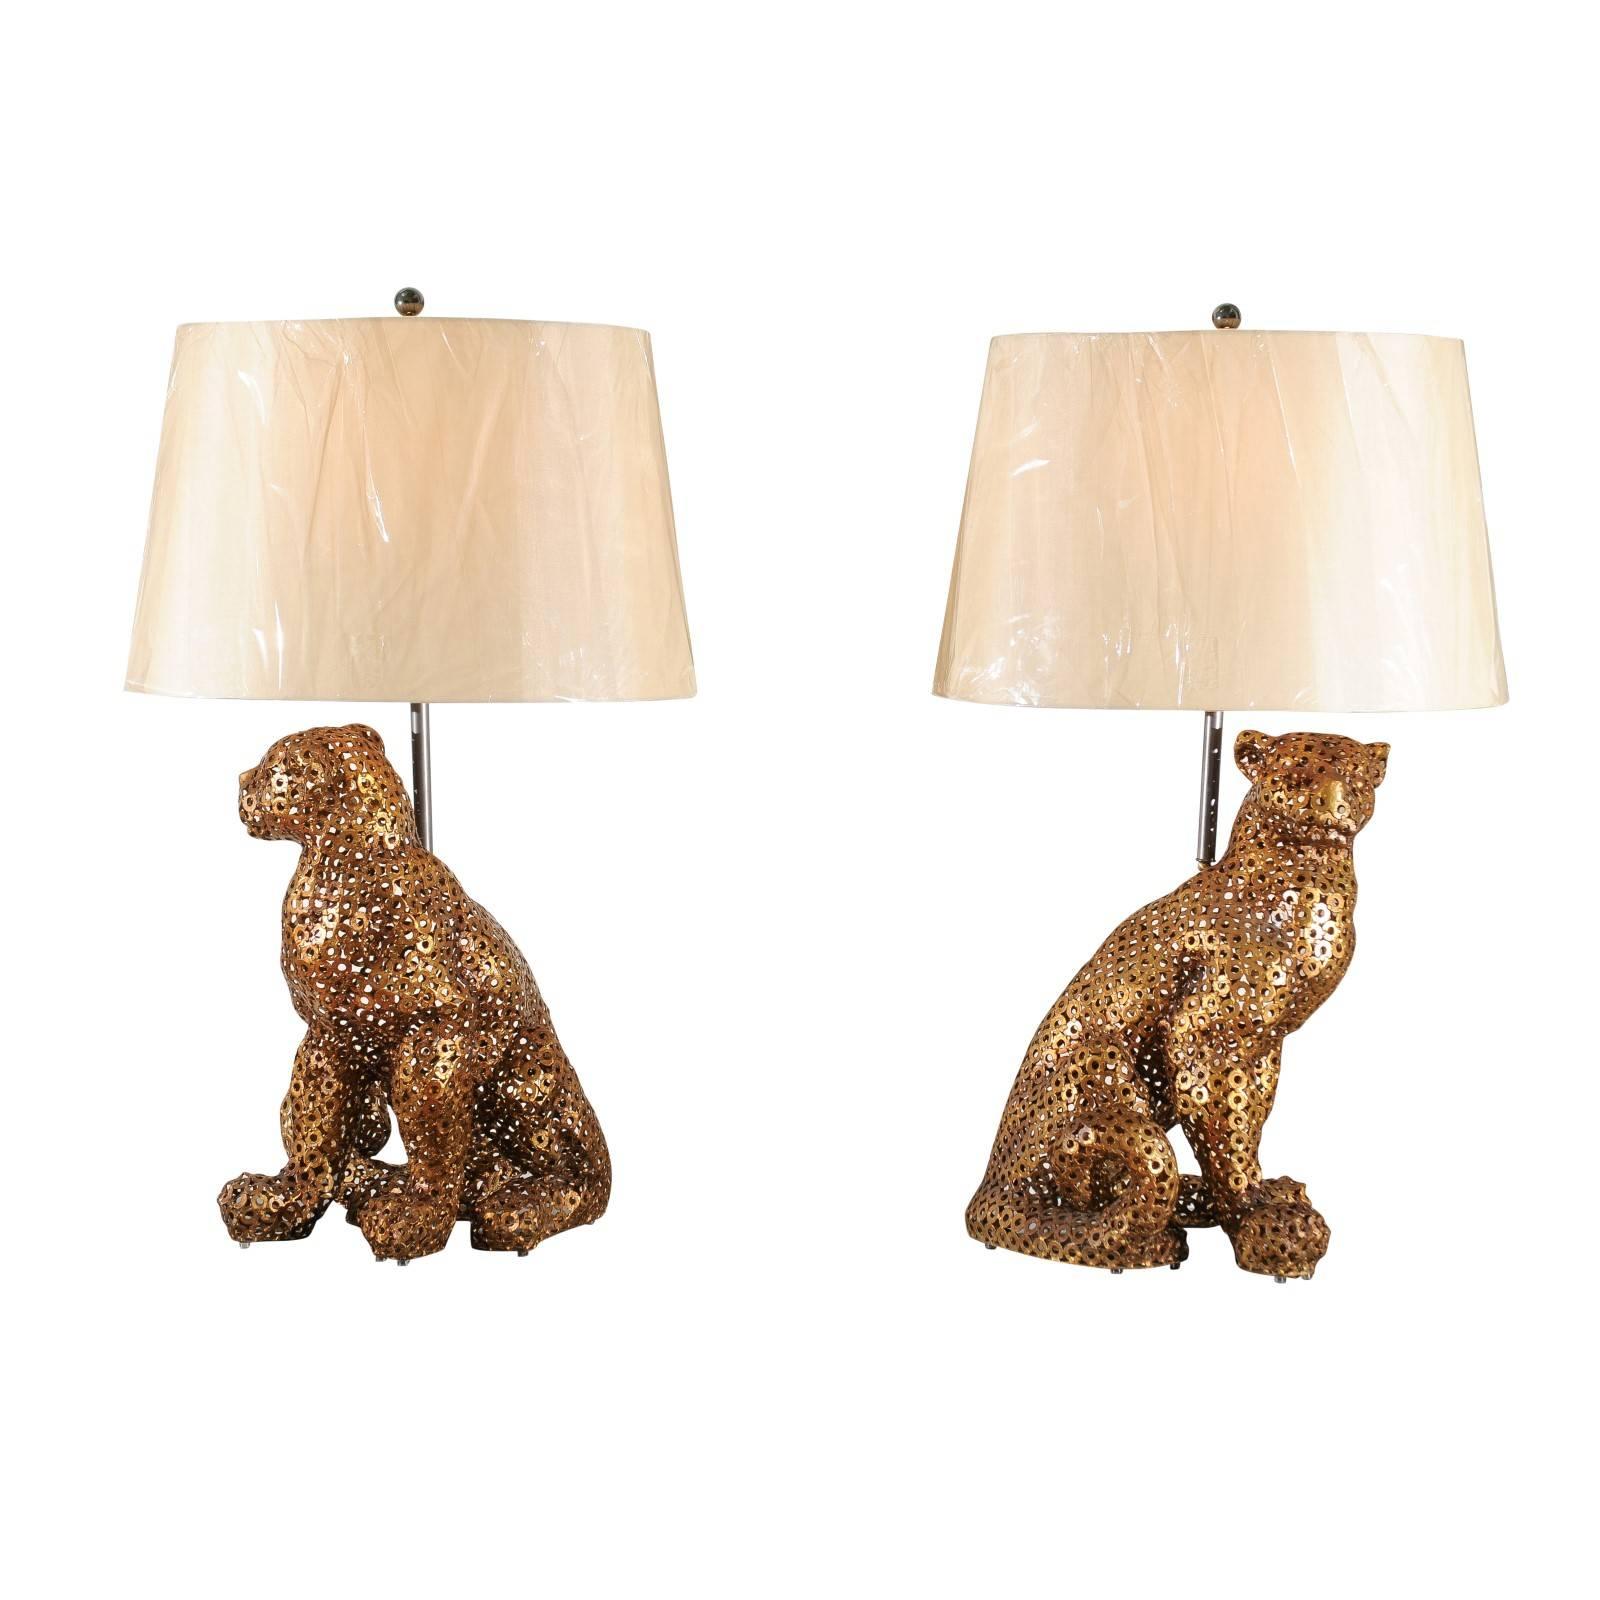 Astonishing Pair of Welded Steel Panthers as Custom Lamps For Sale